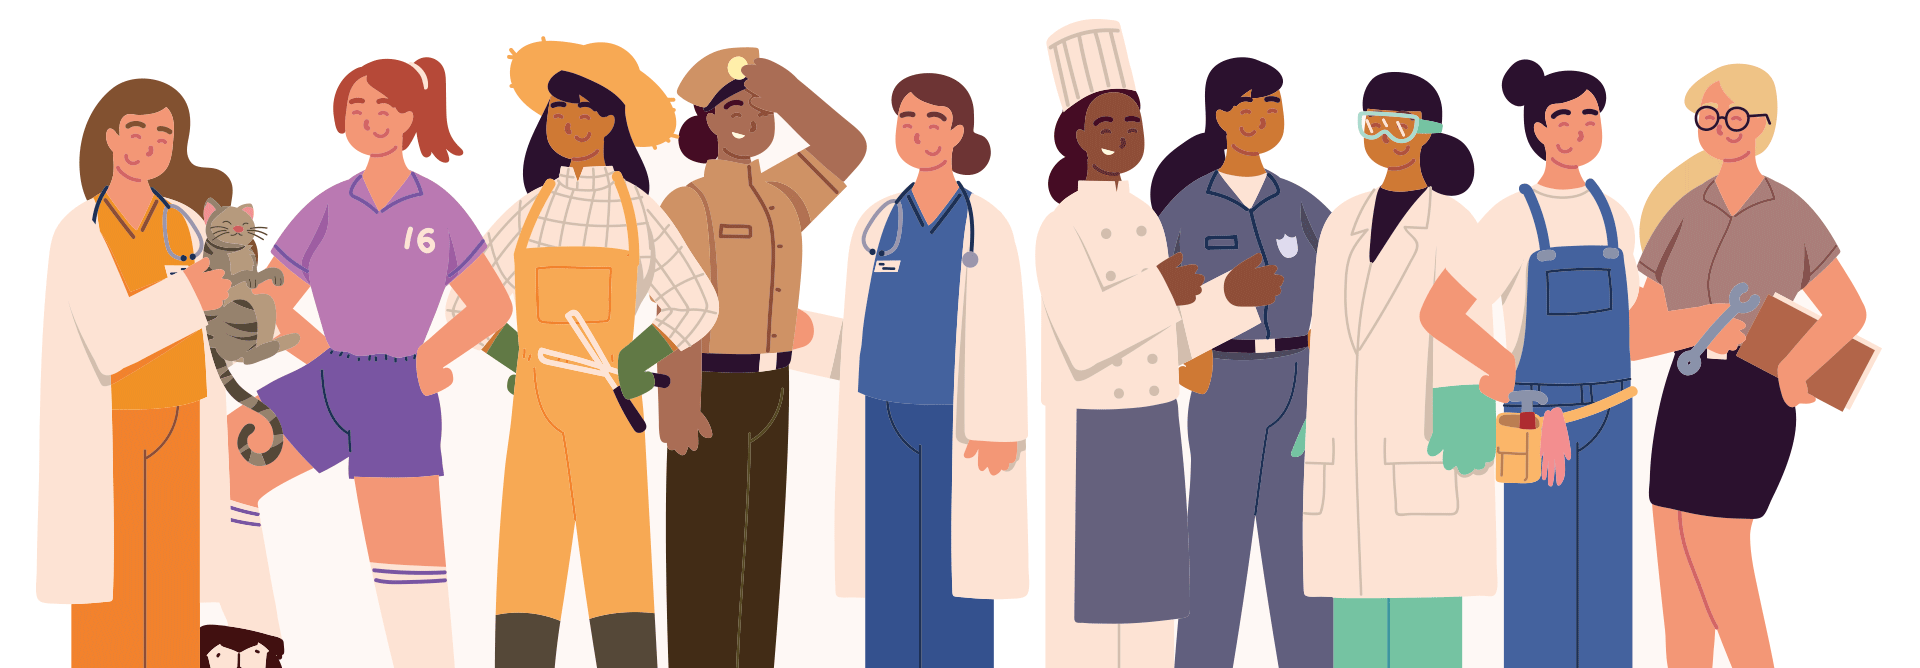 An illustration showing many diverse, professional women.